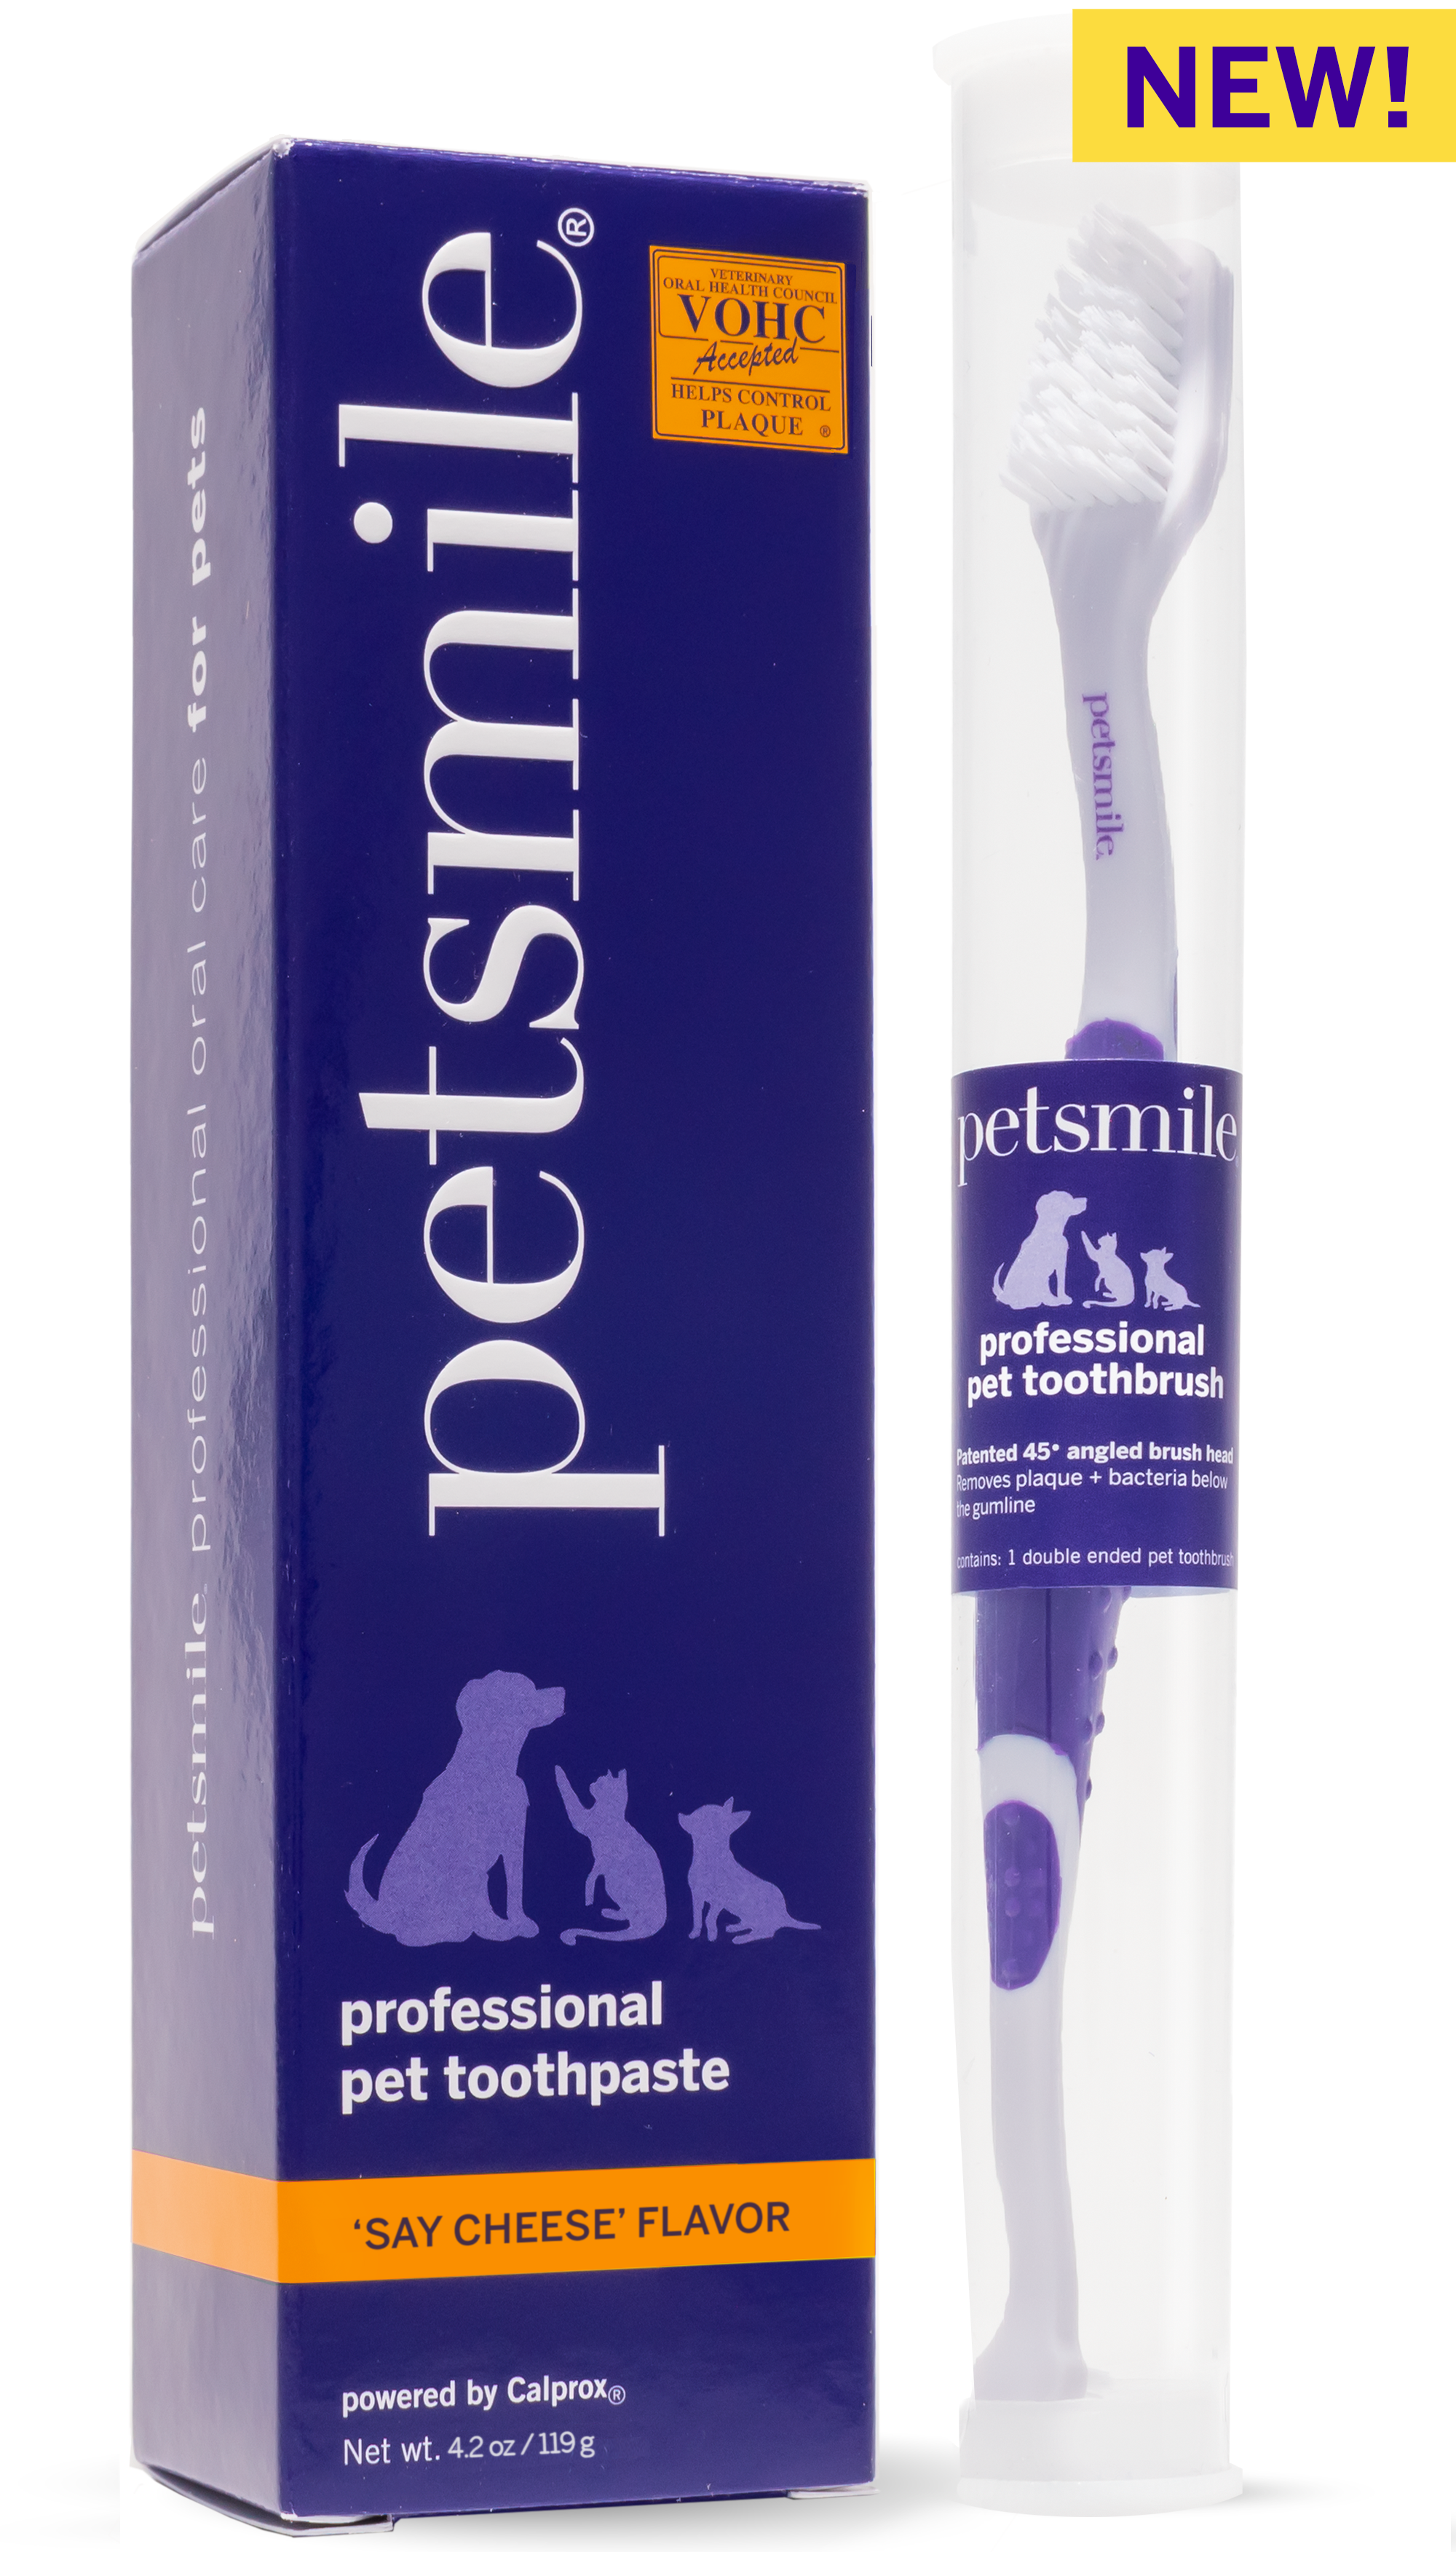 Large tube of purple petsmile toothpaste , petsmile professional toothpaste with cheese flavor , Professional-grade brush and toothpaste combo , Large toothbrush and toothpaste in cheese flavor , petsmile dental care for professional results